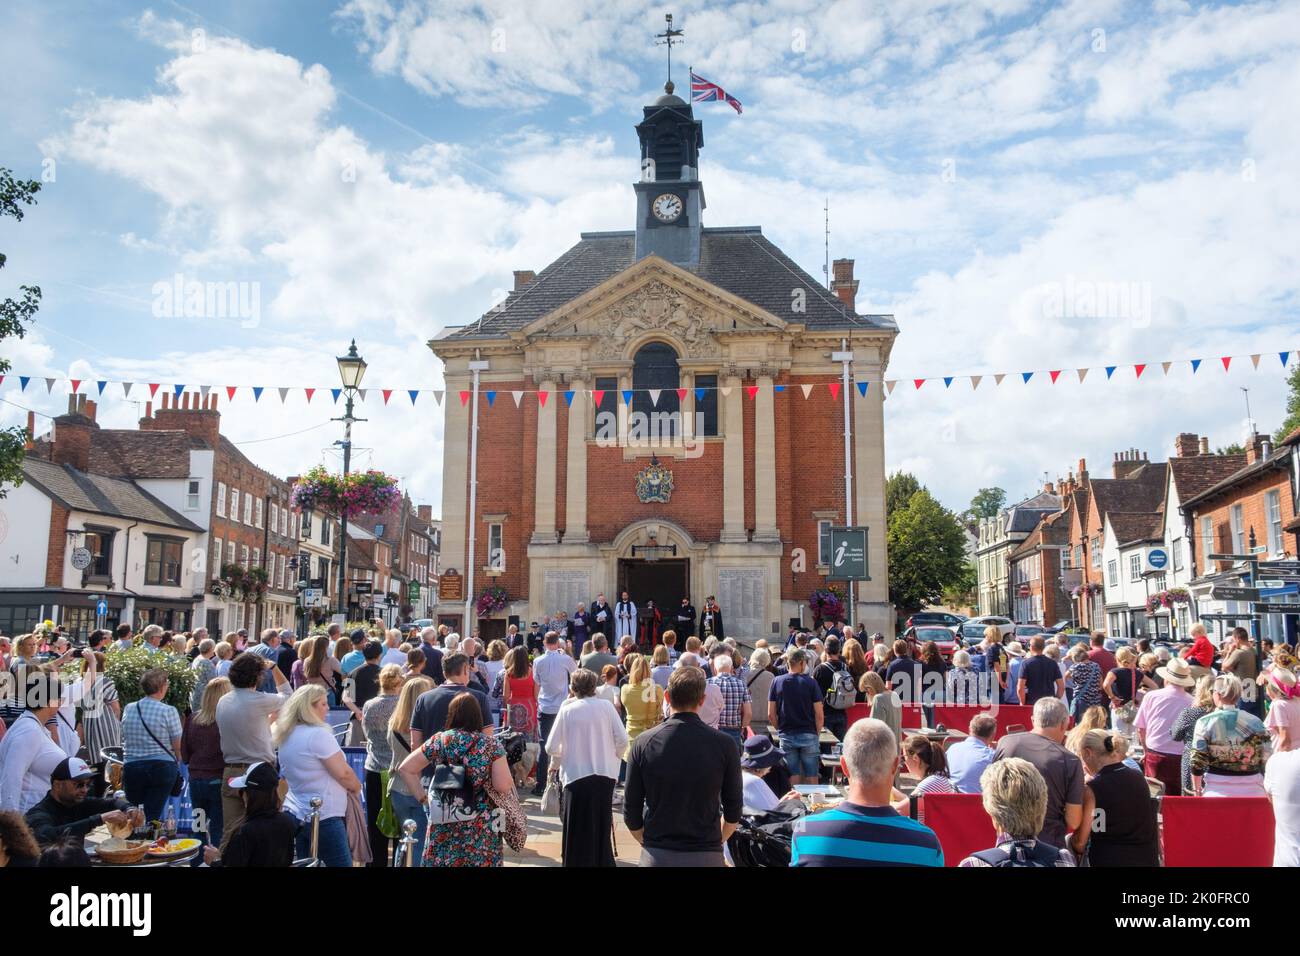 Residents of Henley-on-Thames gather in front of the Town Hall to hear the Proclamation Service for the Accession of King Charles III Stock Photo